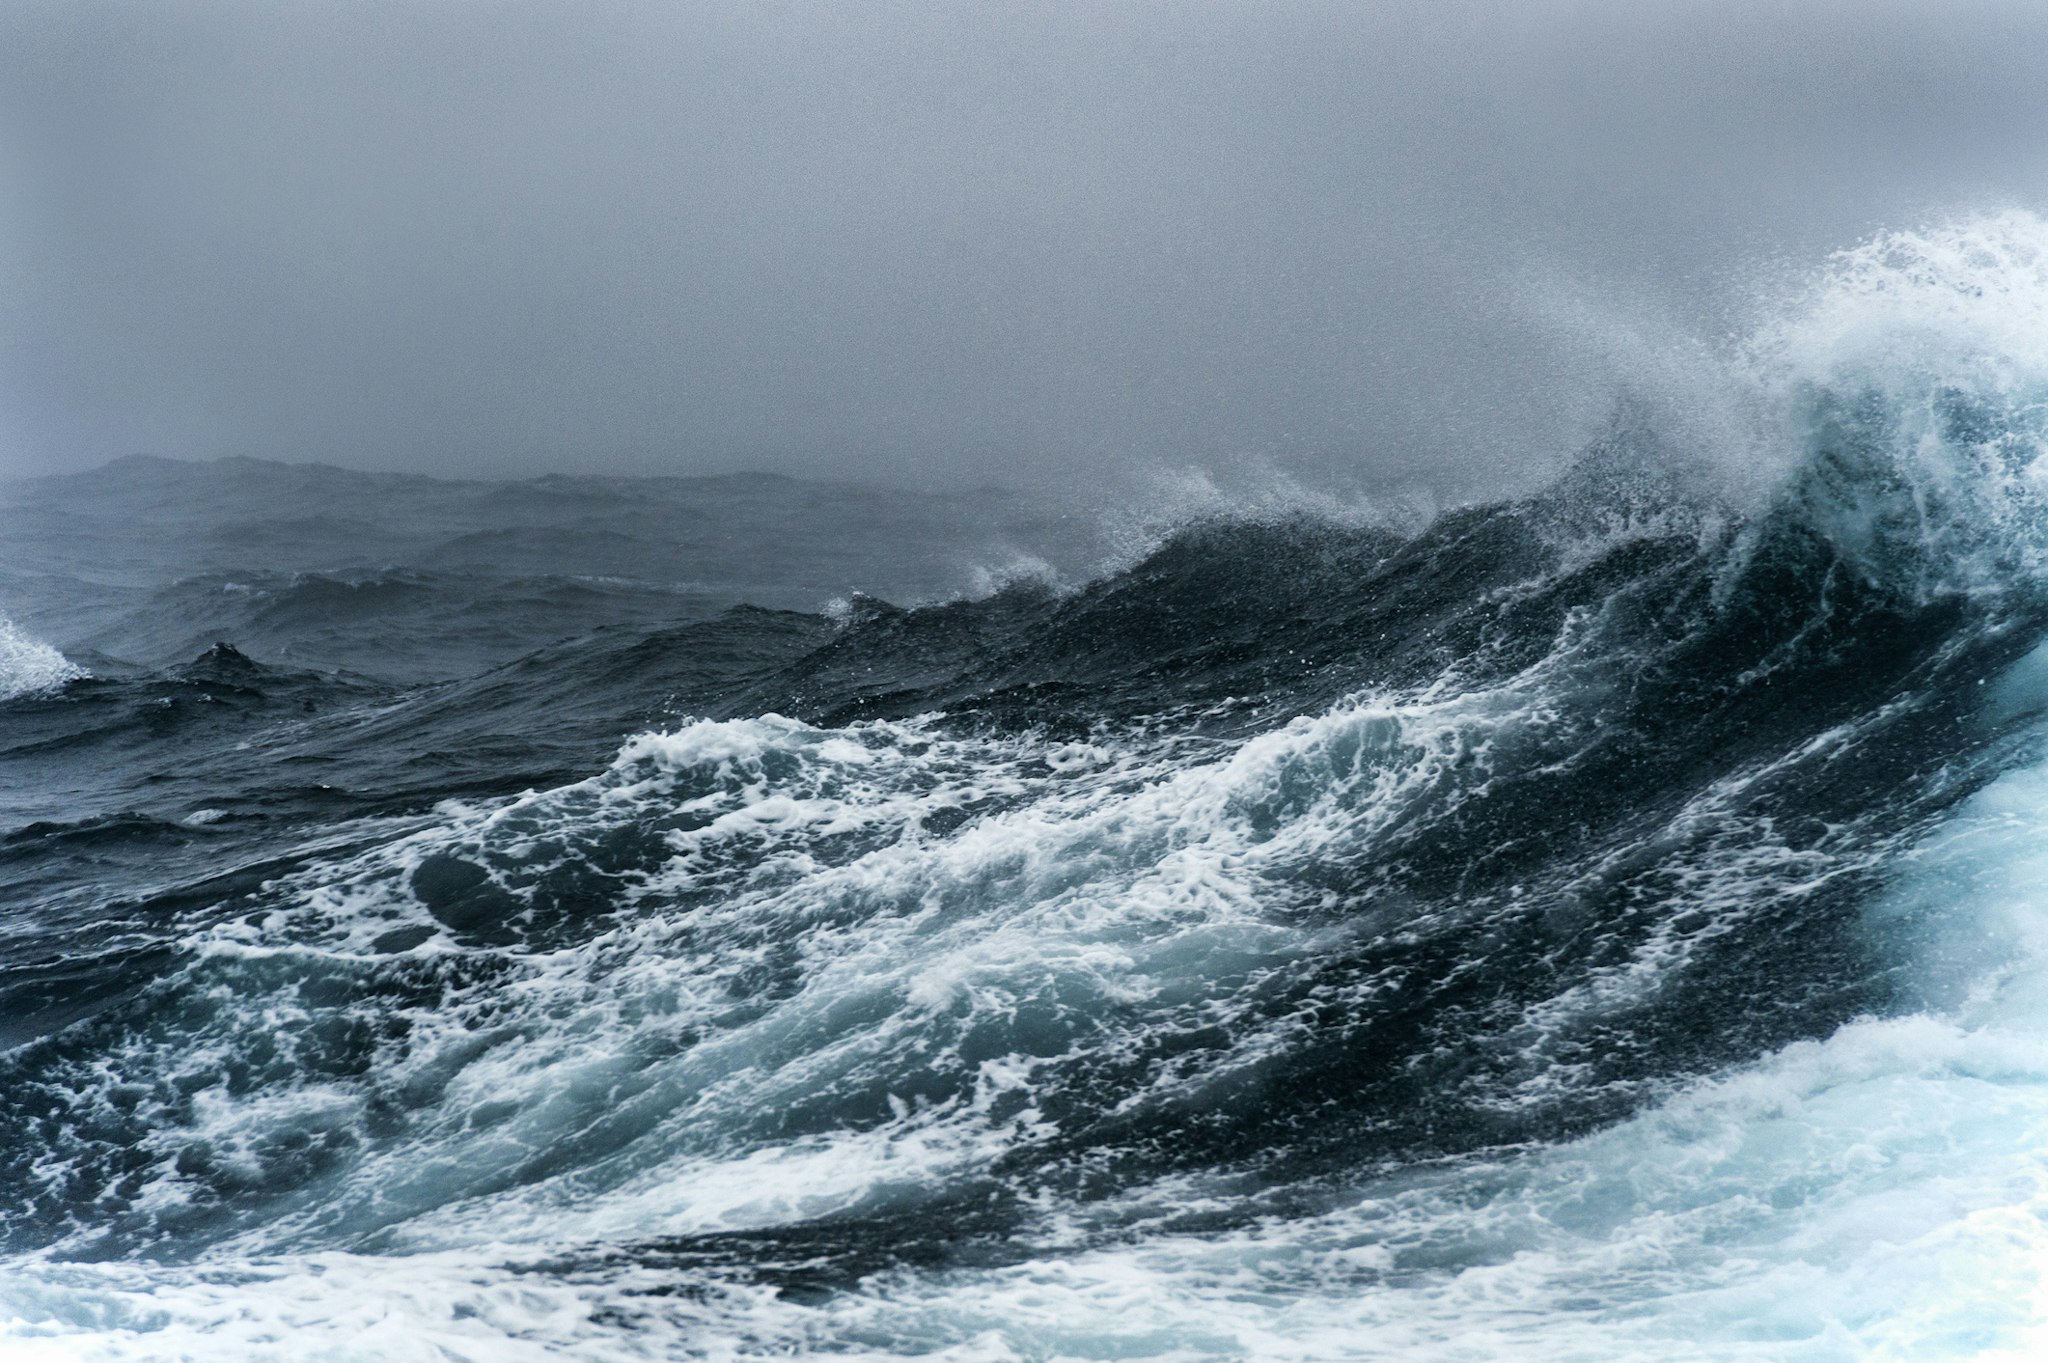 Breaking wave on a rough sea against overcast sky, Southern Ocean.